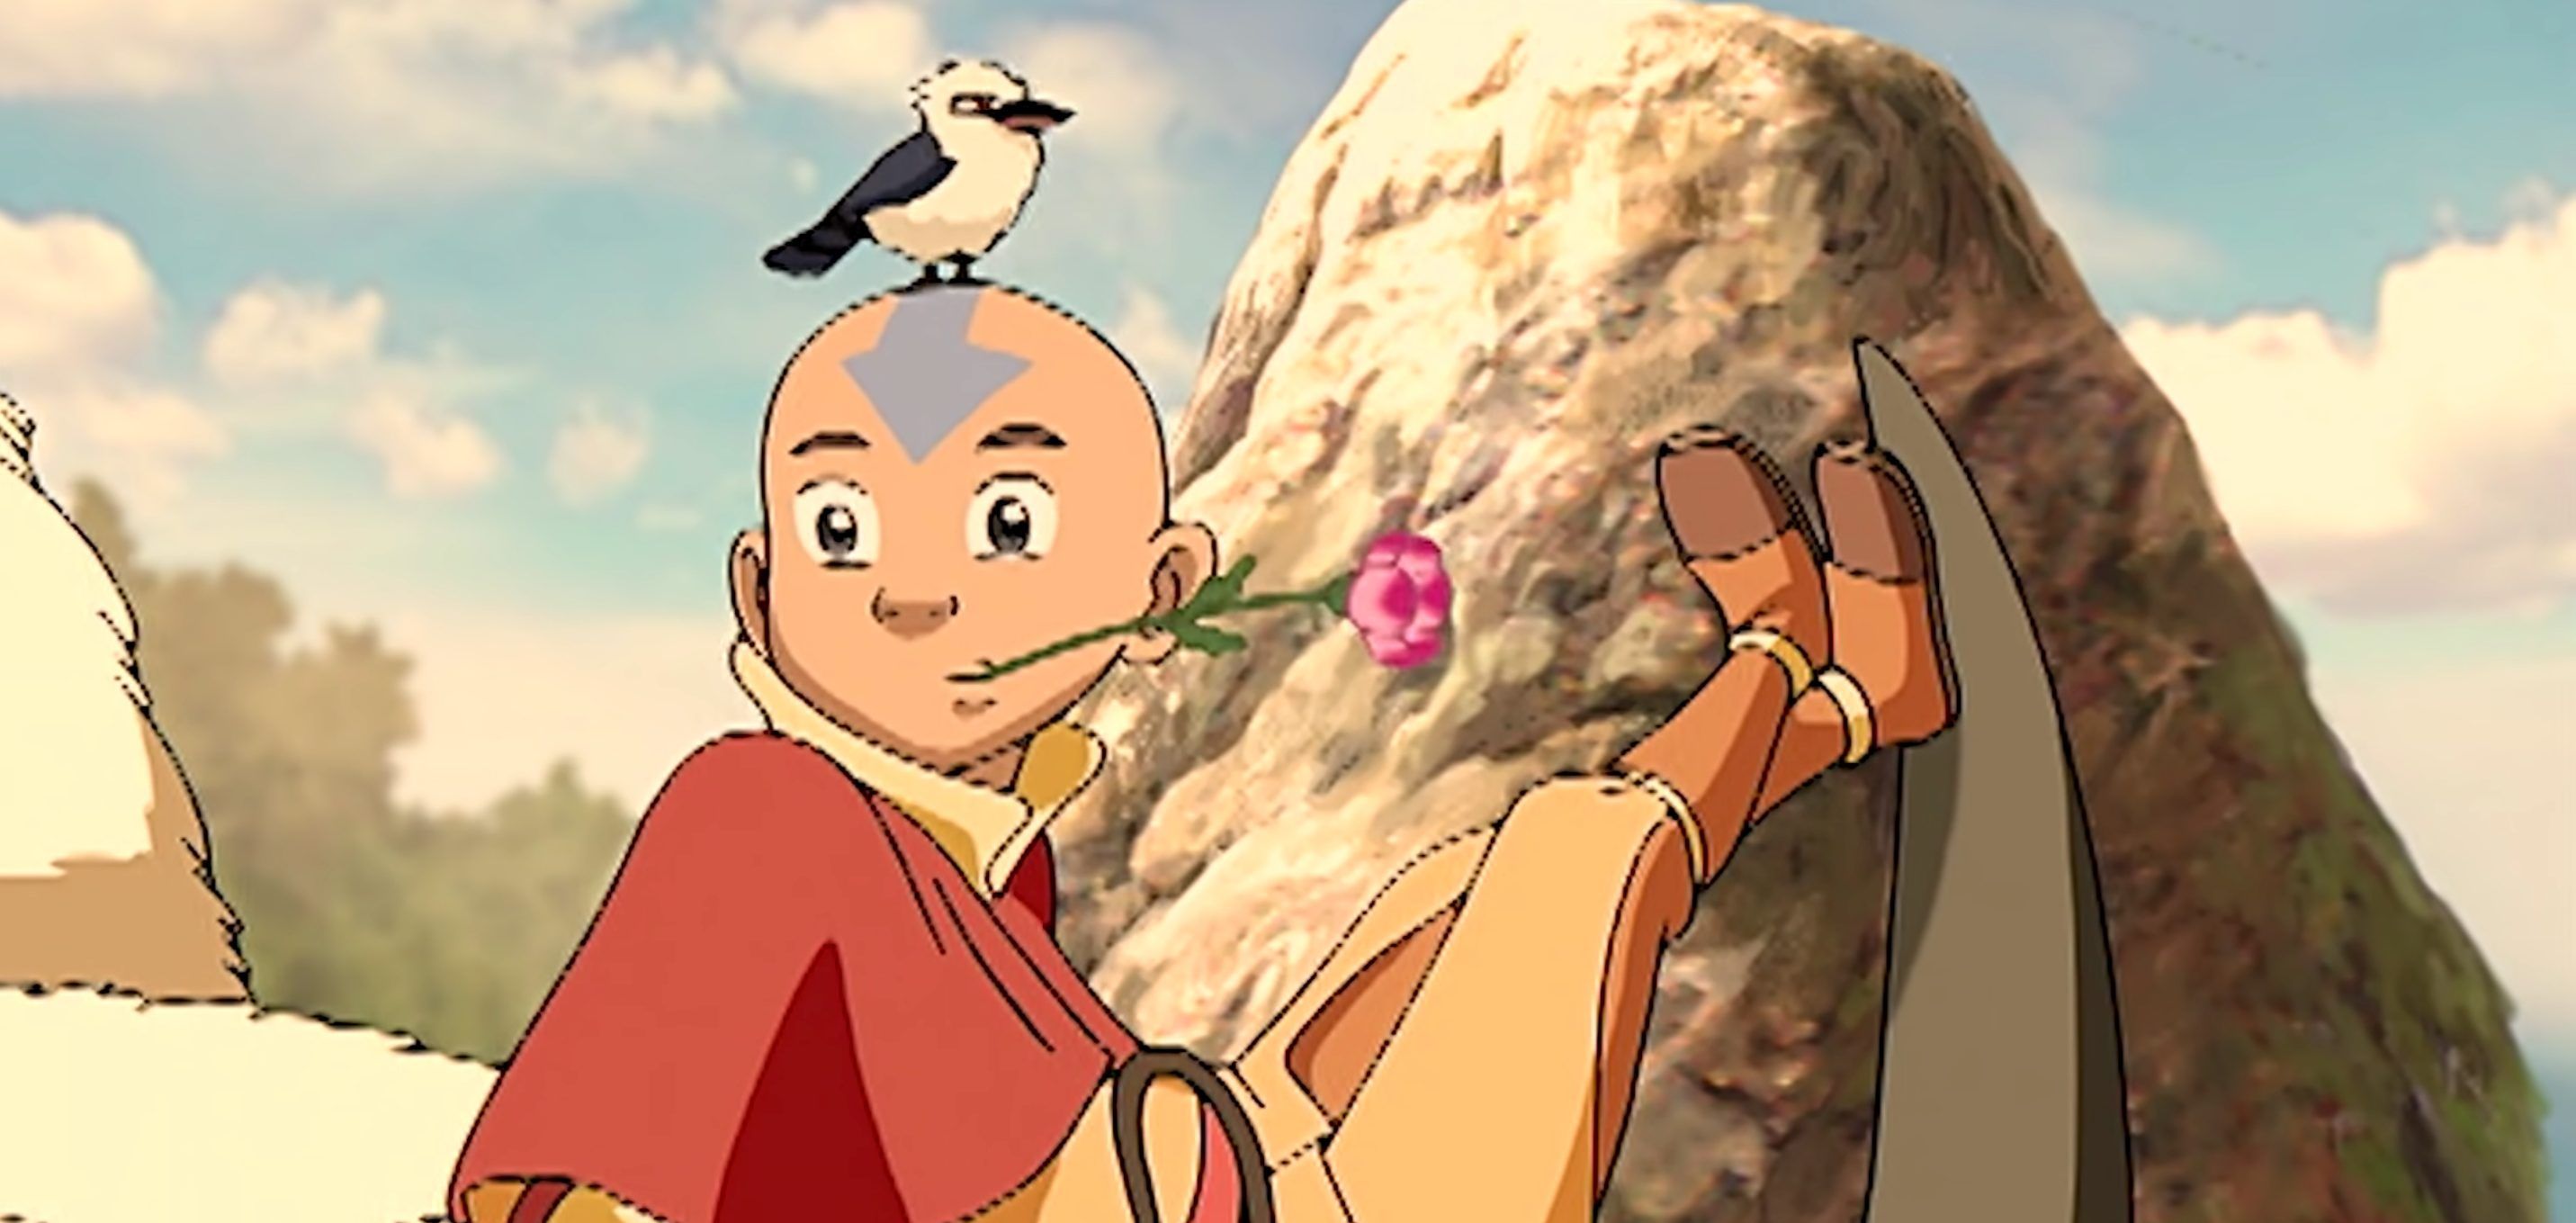 Аватар аанг русские субтитры. Никелодеон аватар аанг. Avatar the last Airbender Unaired Pilot.